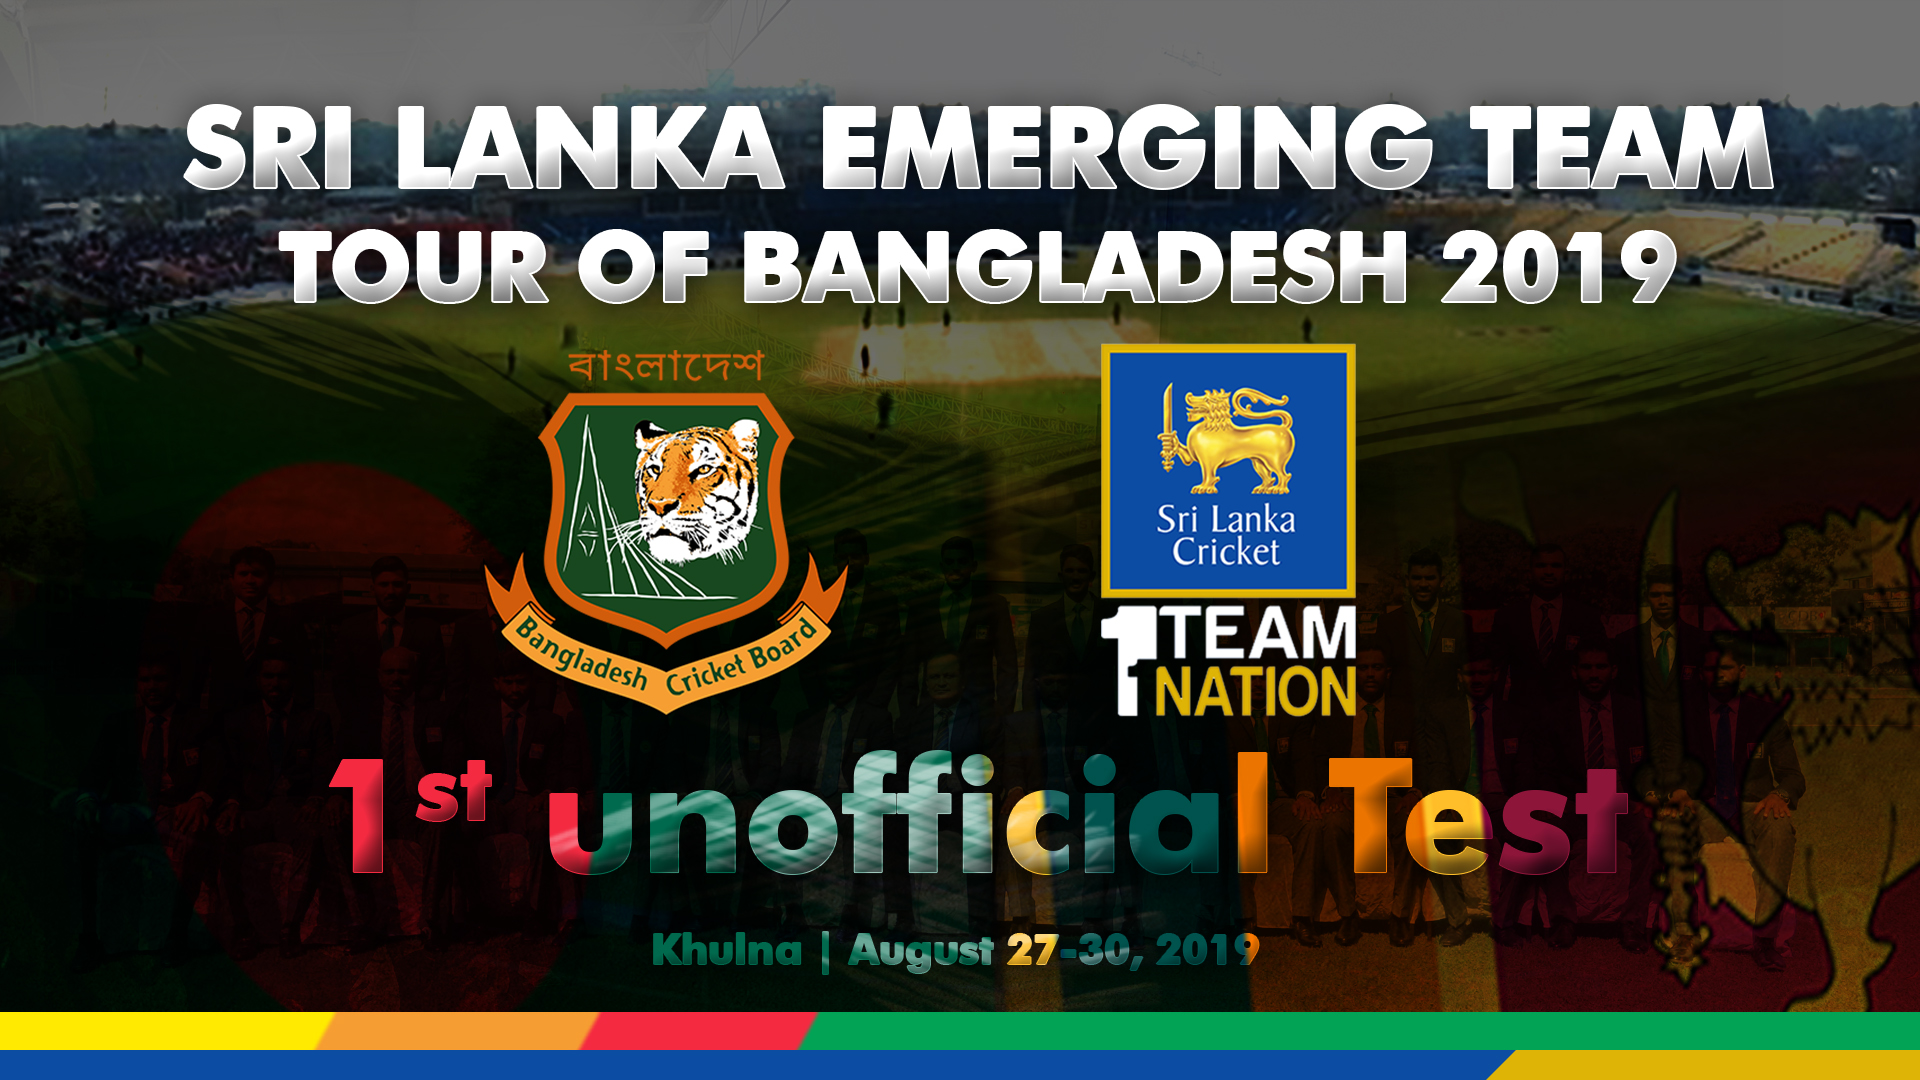 Magnificence is made of this – Bandara virtual One Man Show 85 as Sri Lanka Emerging Team draw 1st Test